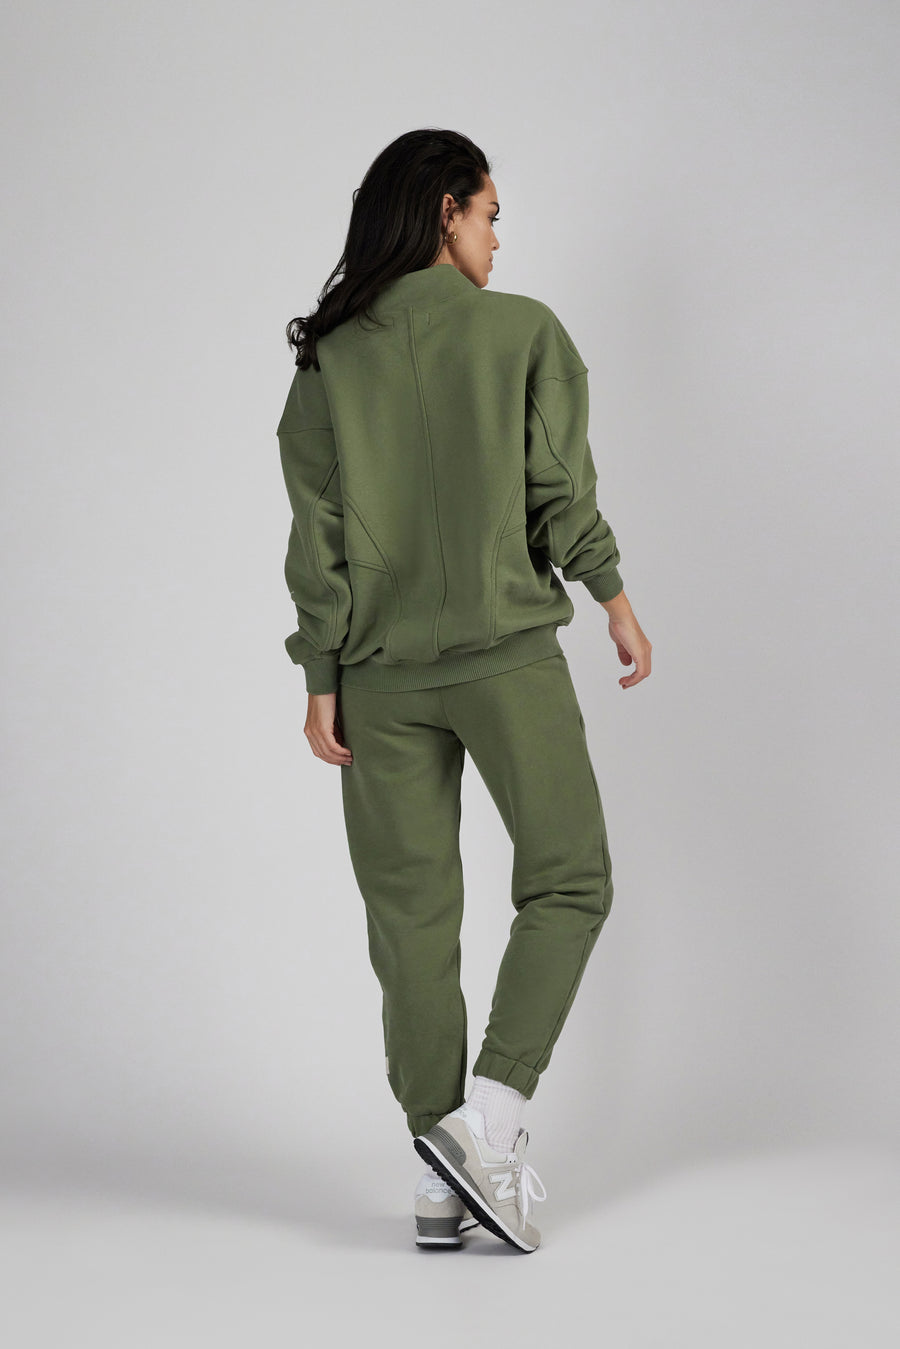 Backside of a woman wearing an oversized zipper sweat jacket and sweatpants in color sage green